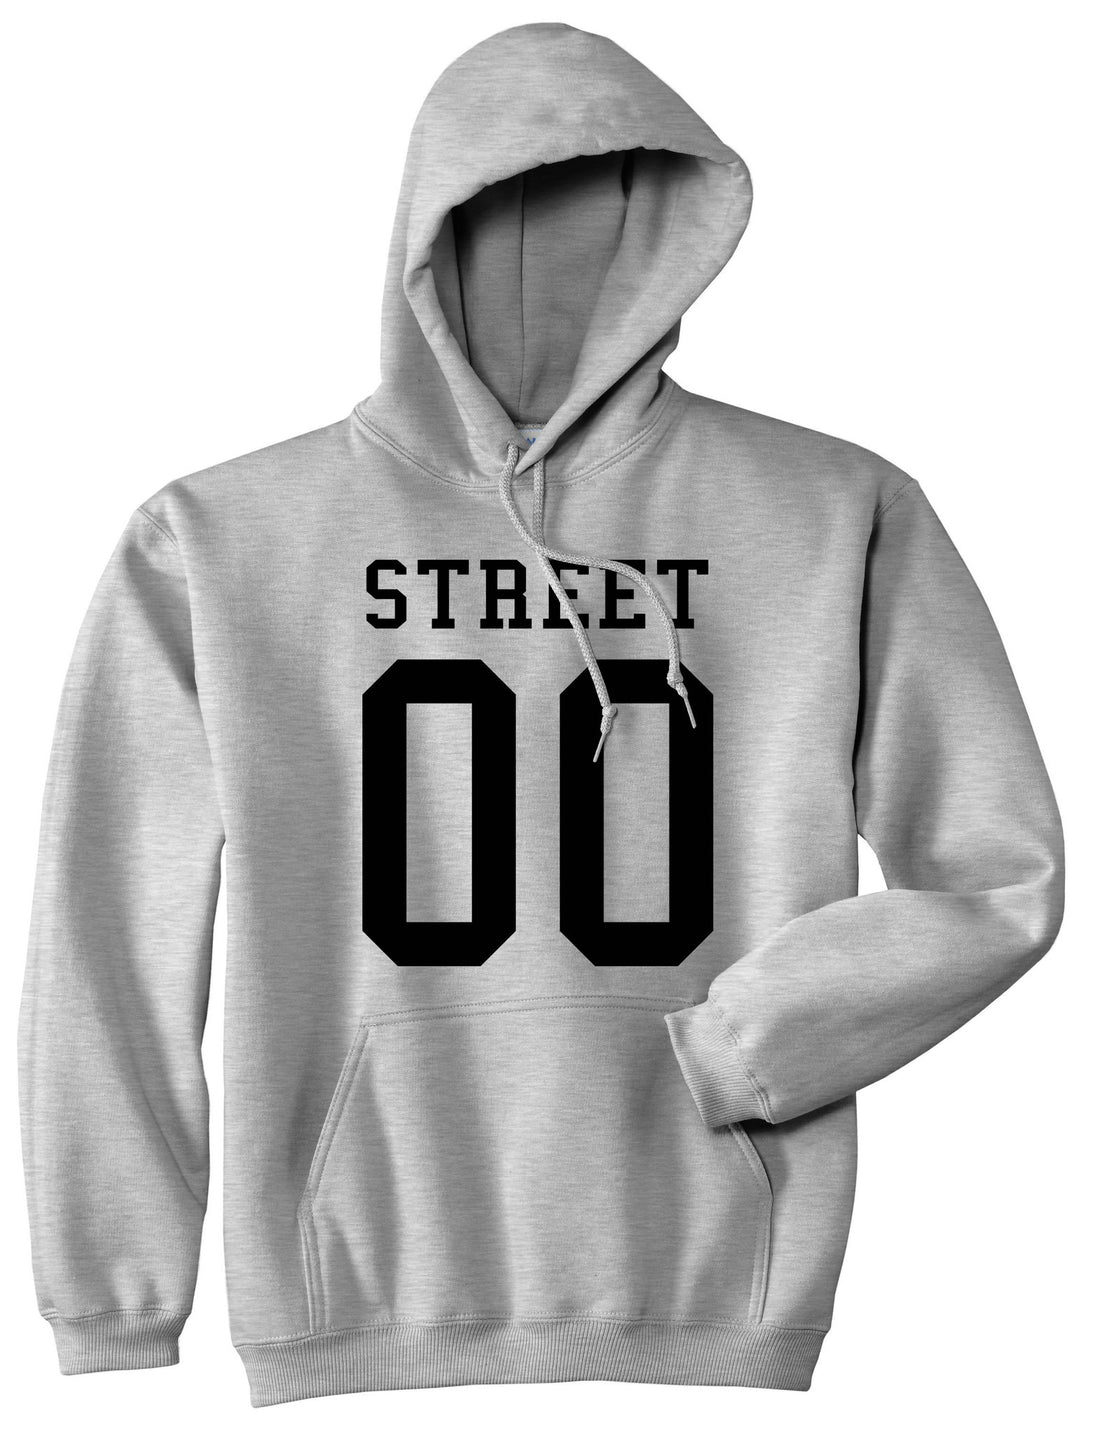 Street Team 00 Jersey Pullover Hoodie in Grey By Kings Of NY